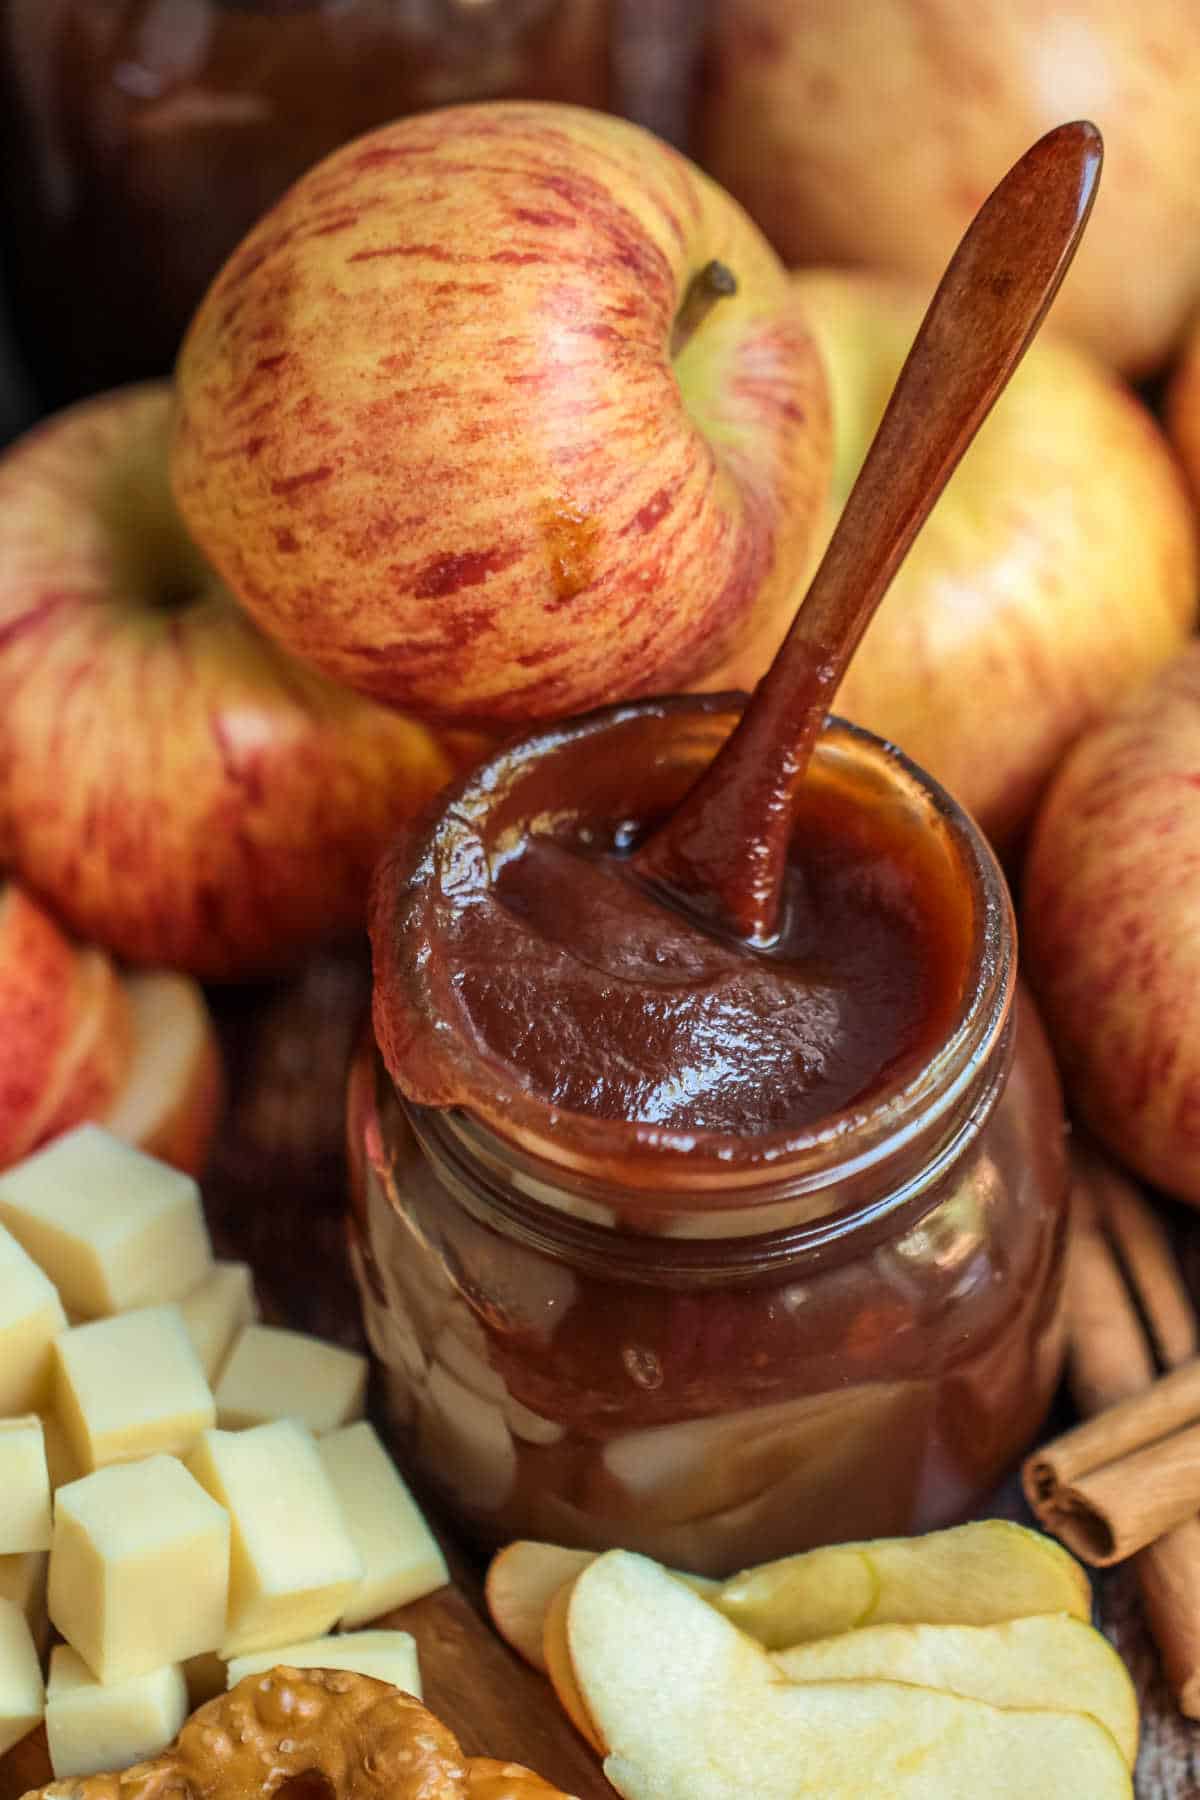 A jar of apple butter with a spoon.